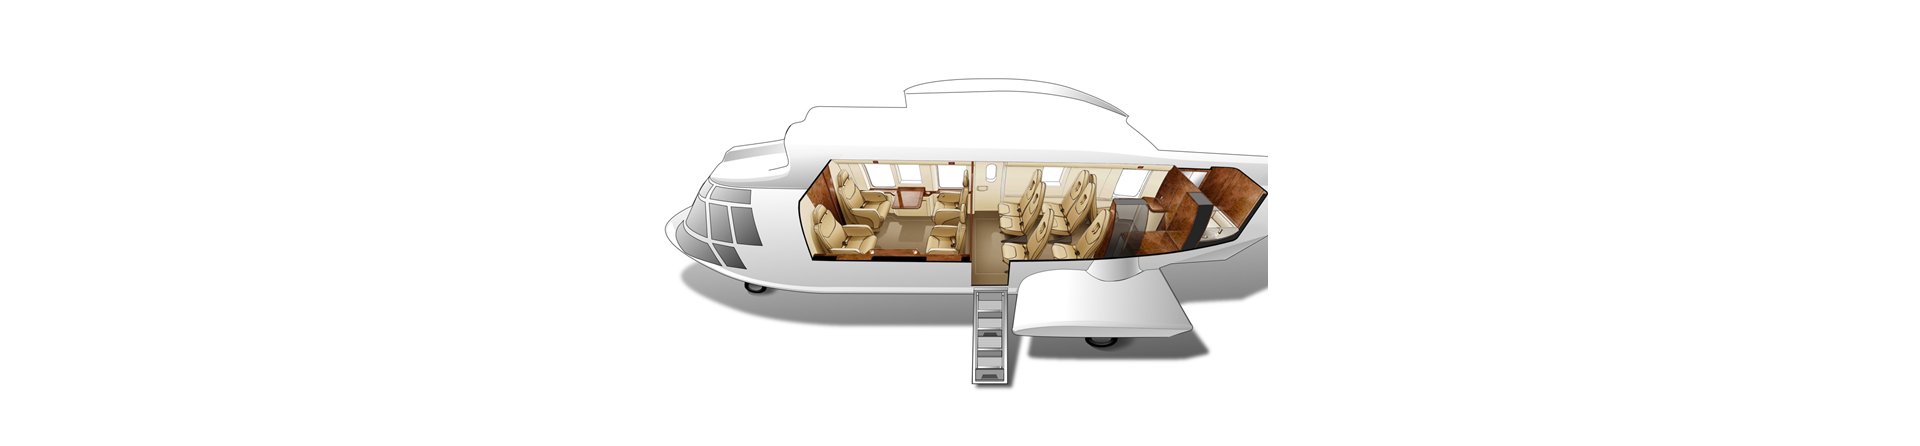 Diagram of an Airbus H225 helicopter cabin for VIP transportation, which can accommodate up to 11 passengers in excellent confort. 